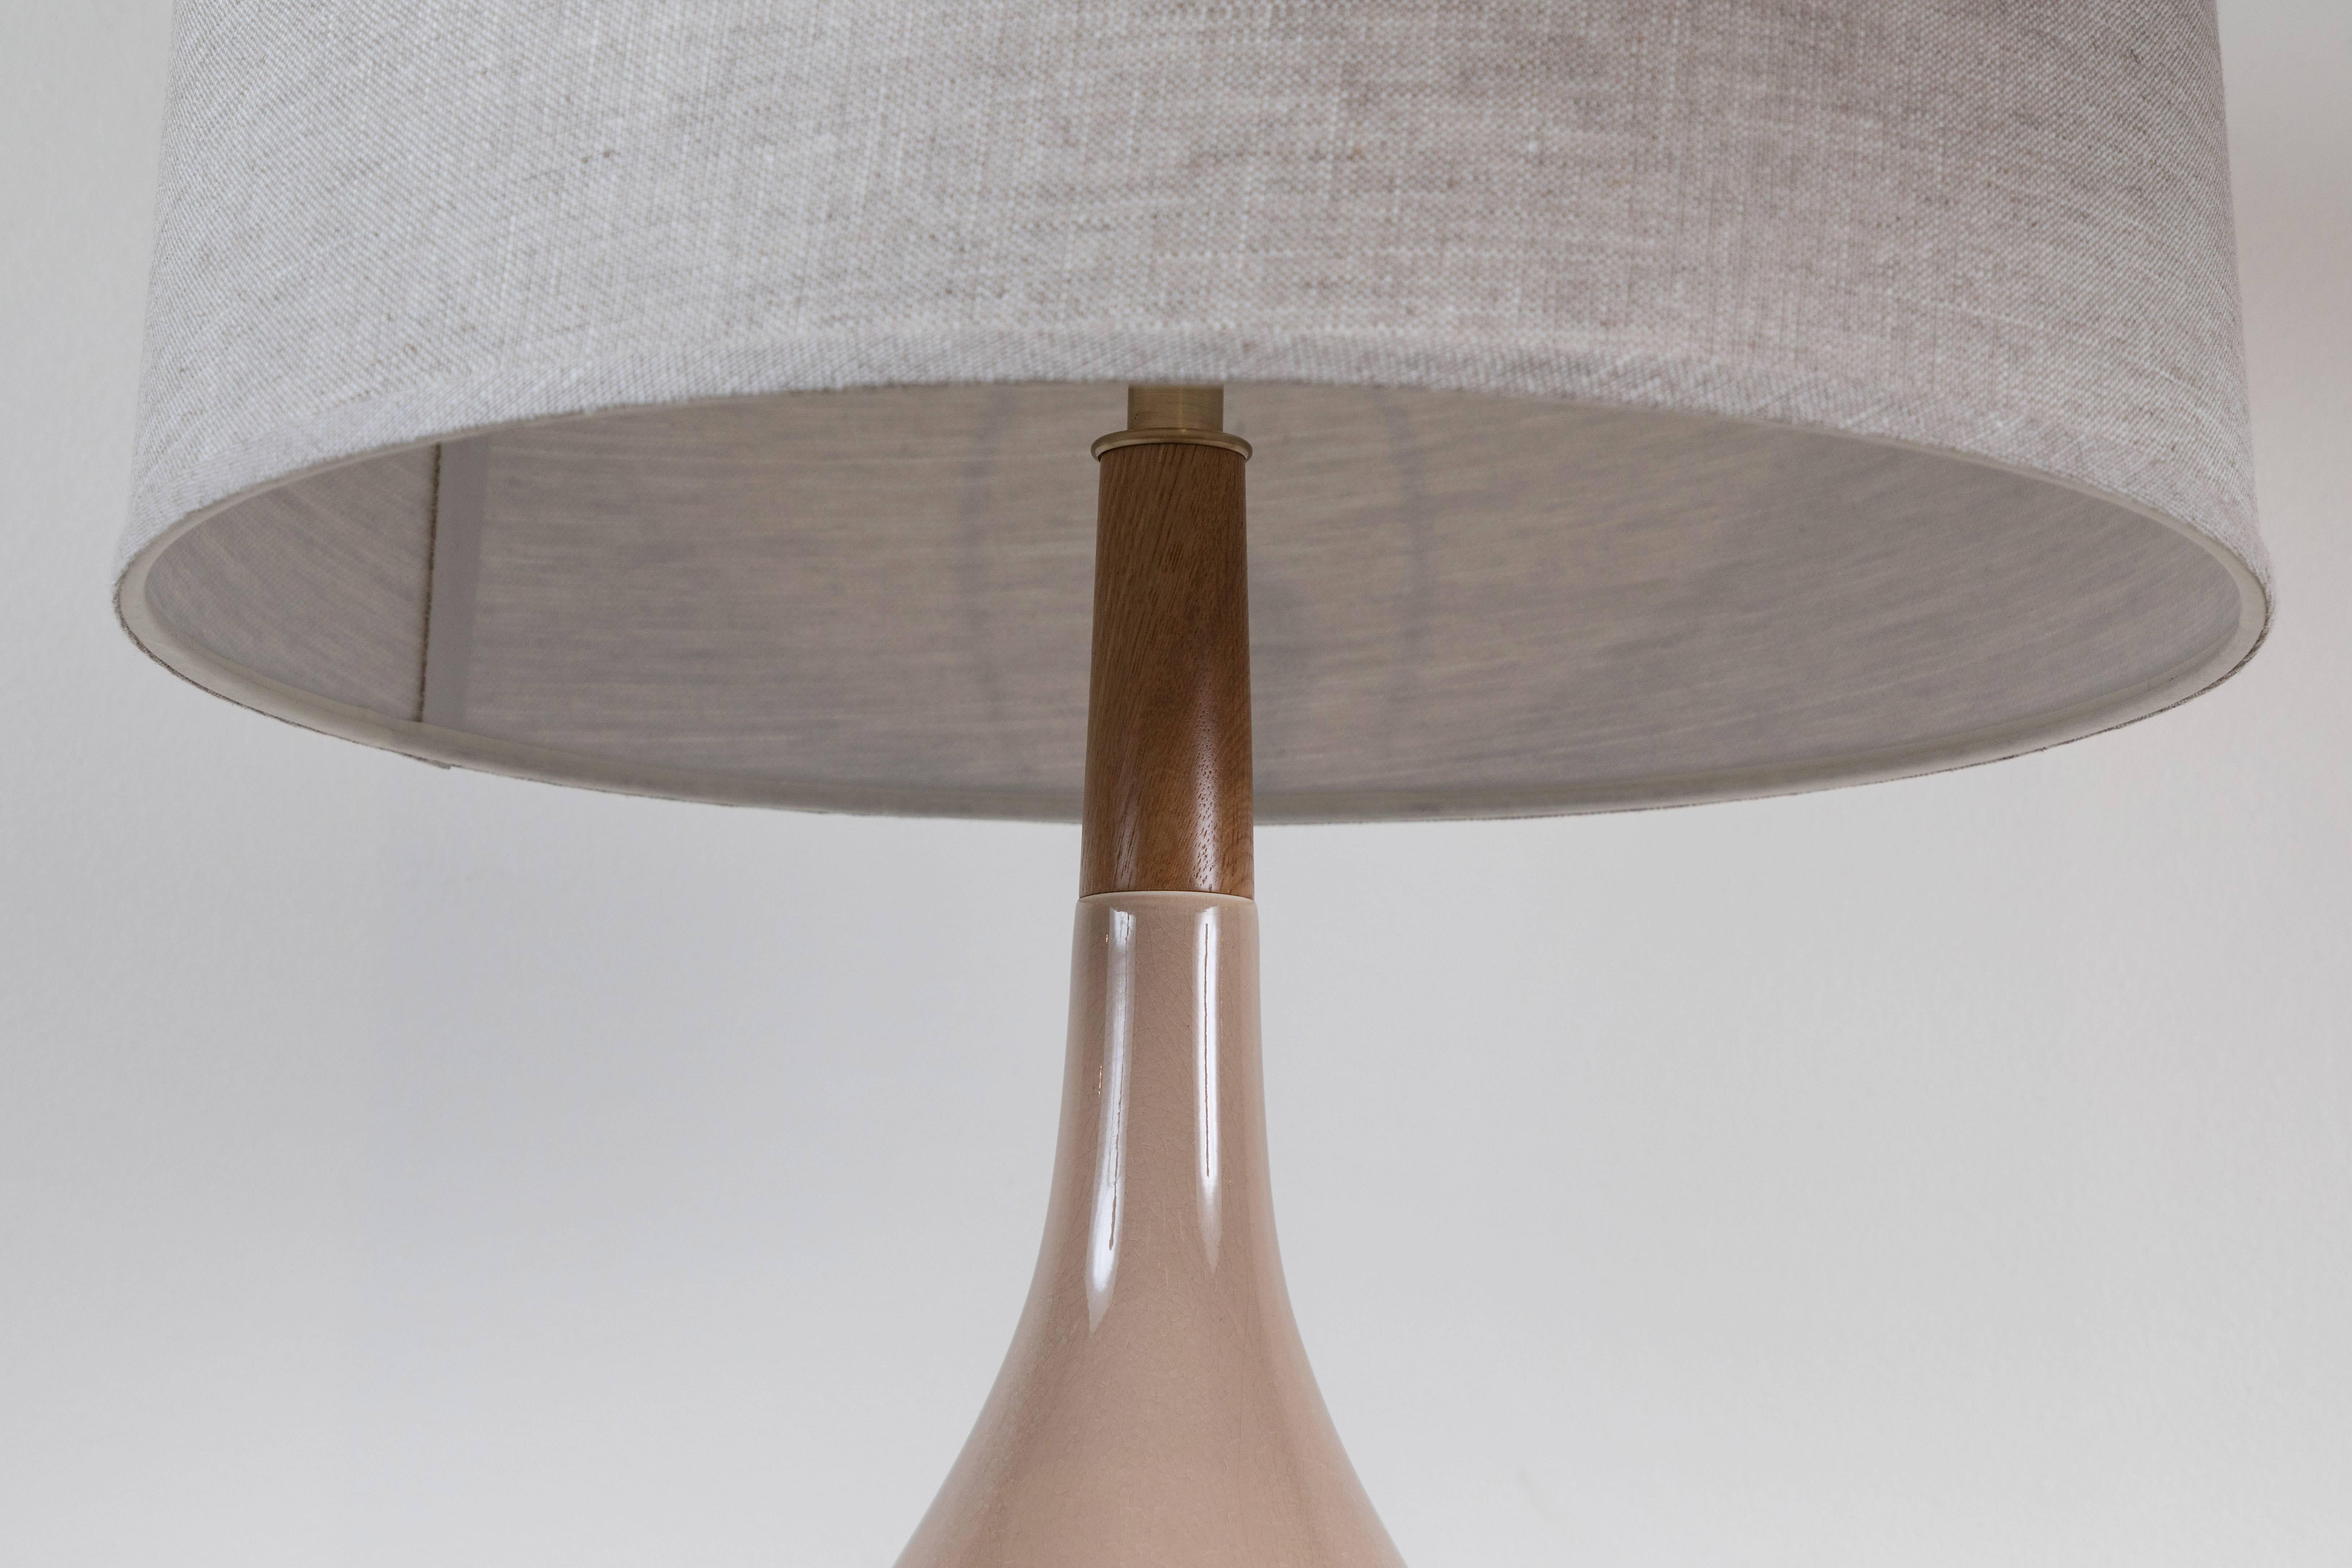 Pair of miller lamps by Stone and Sawyer for Lawson-Fenning